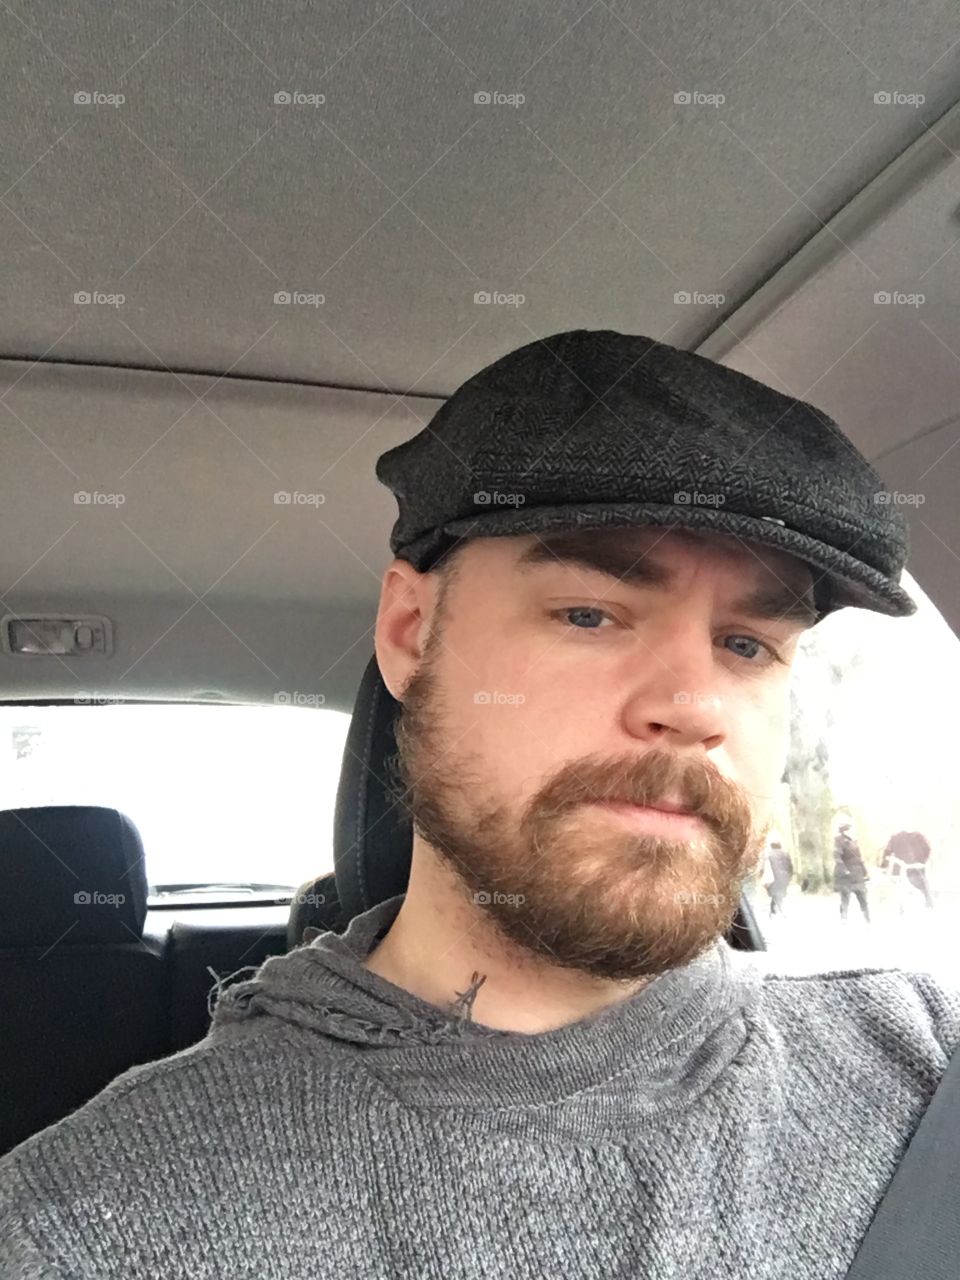 Got a new cap. Never wore one before. Goes well with the new beard! 